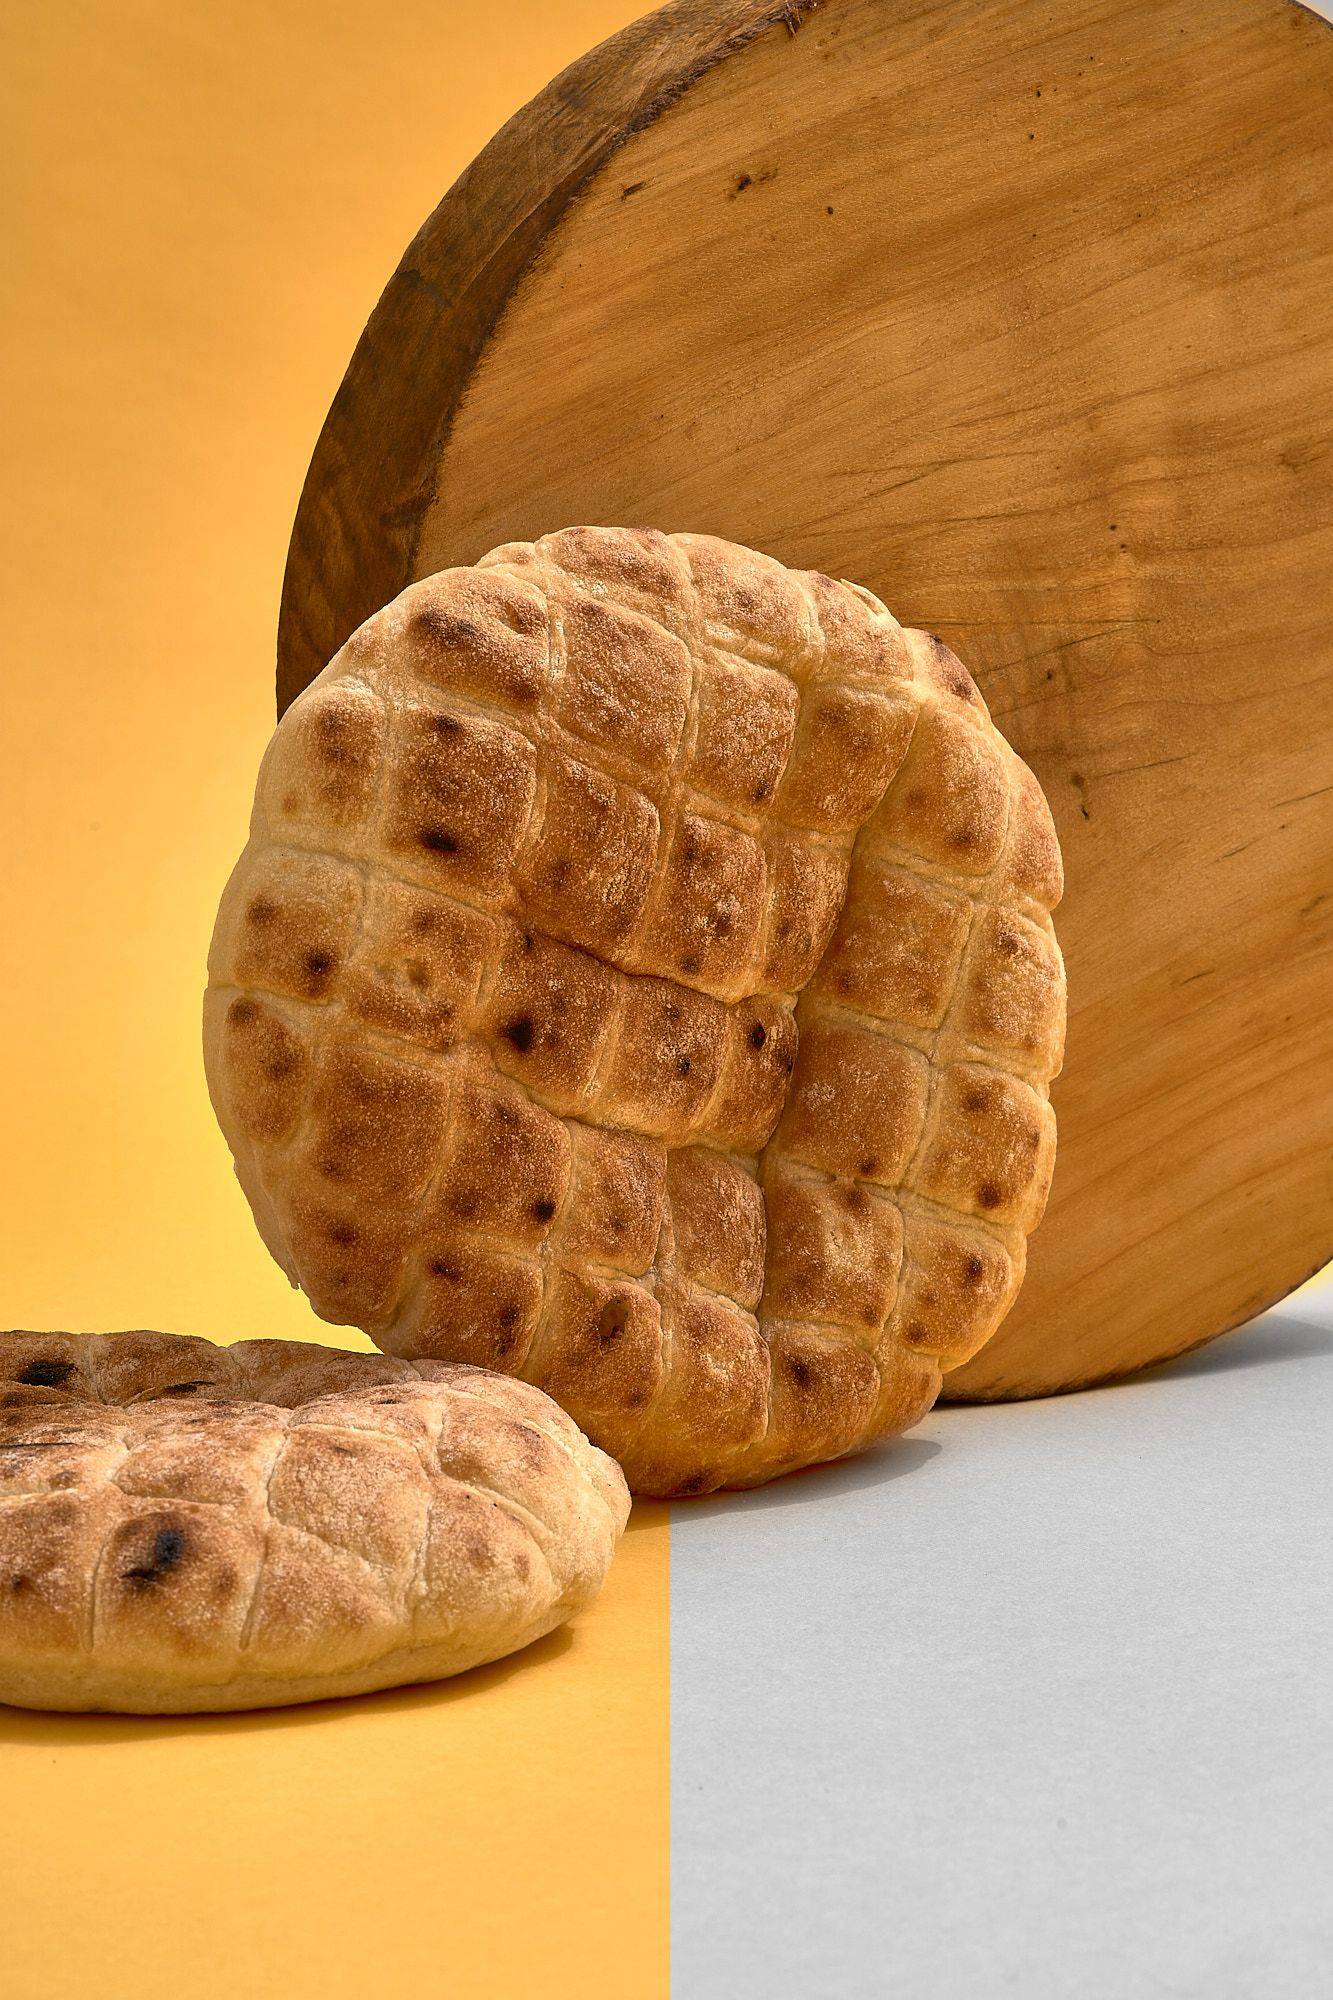 pita bread with wooden board on yellow background